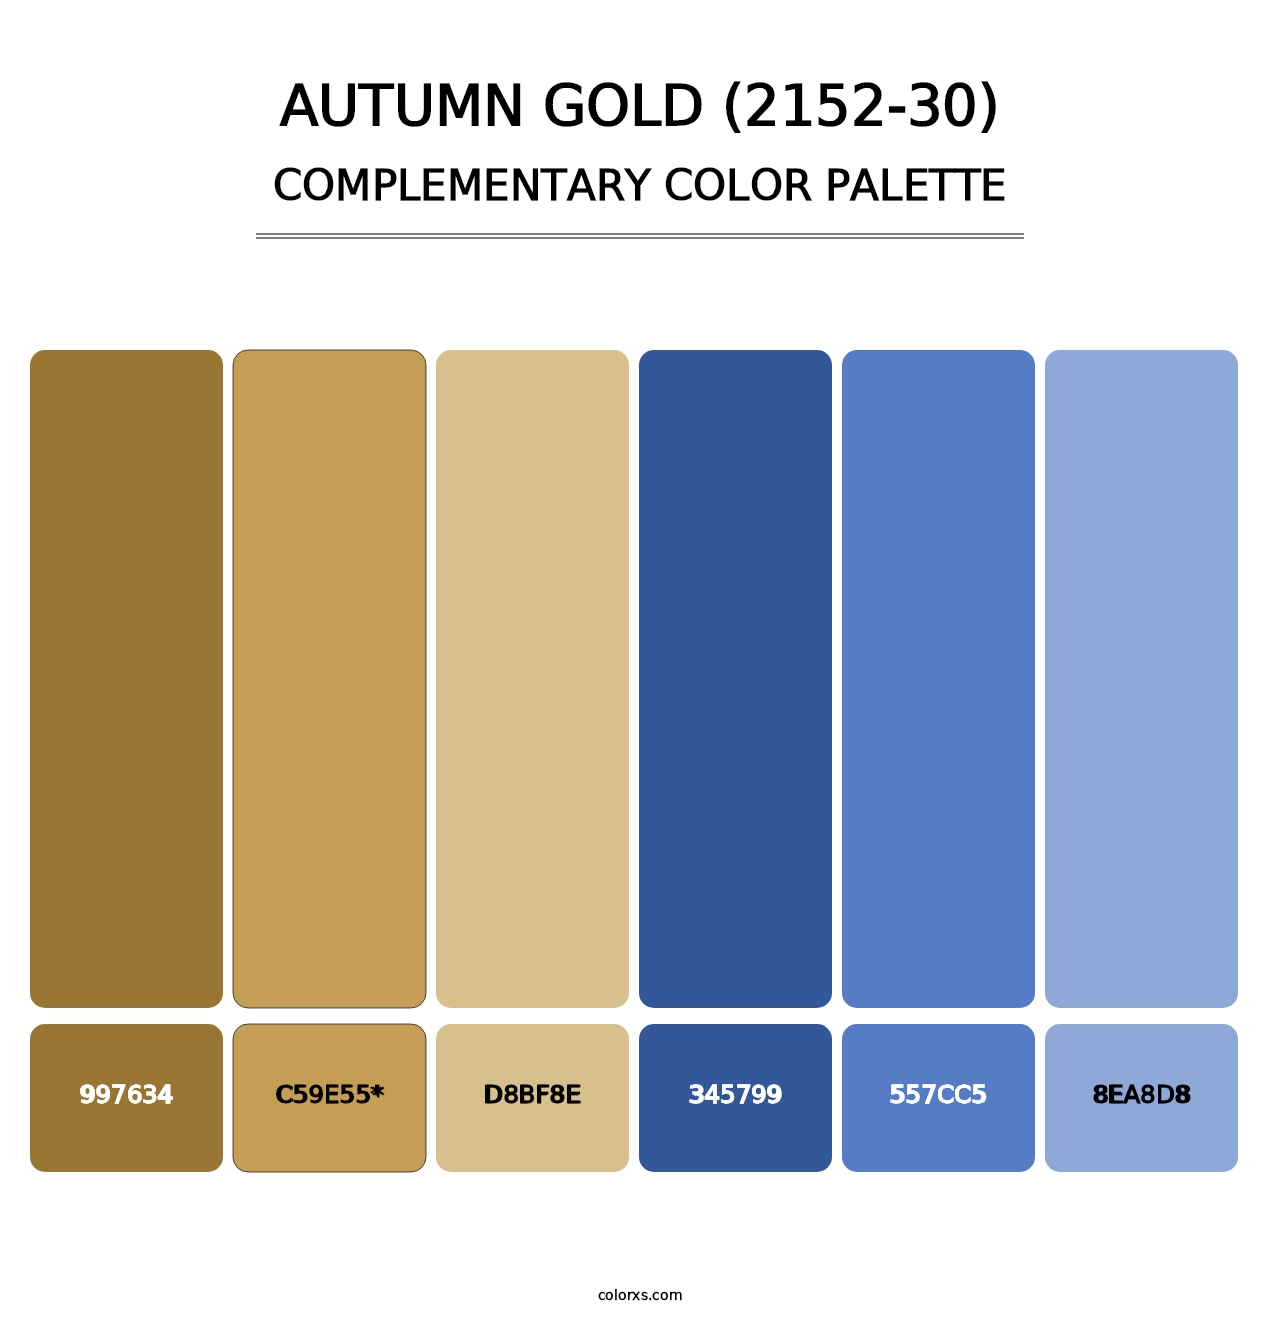 Autumn Gold (2152-30) - Complementary Color Palette